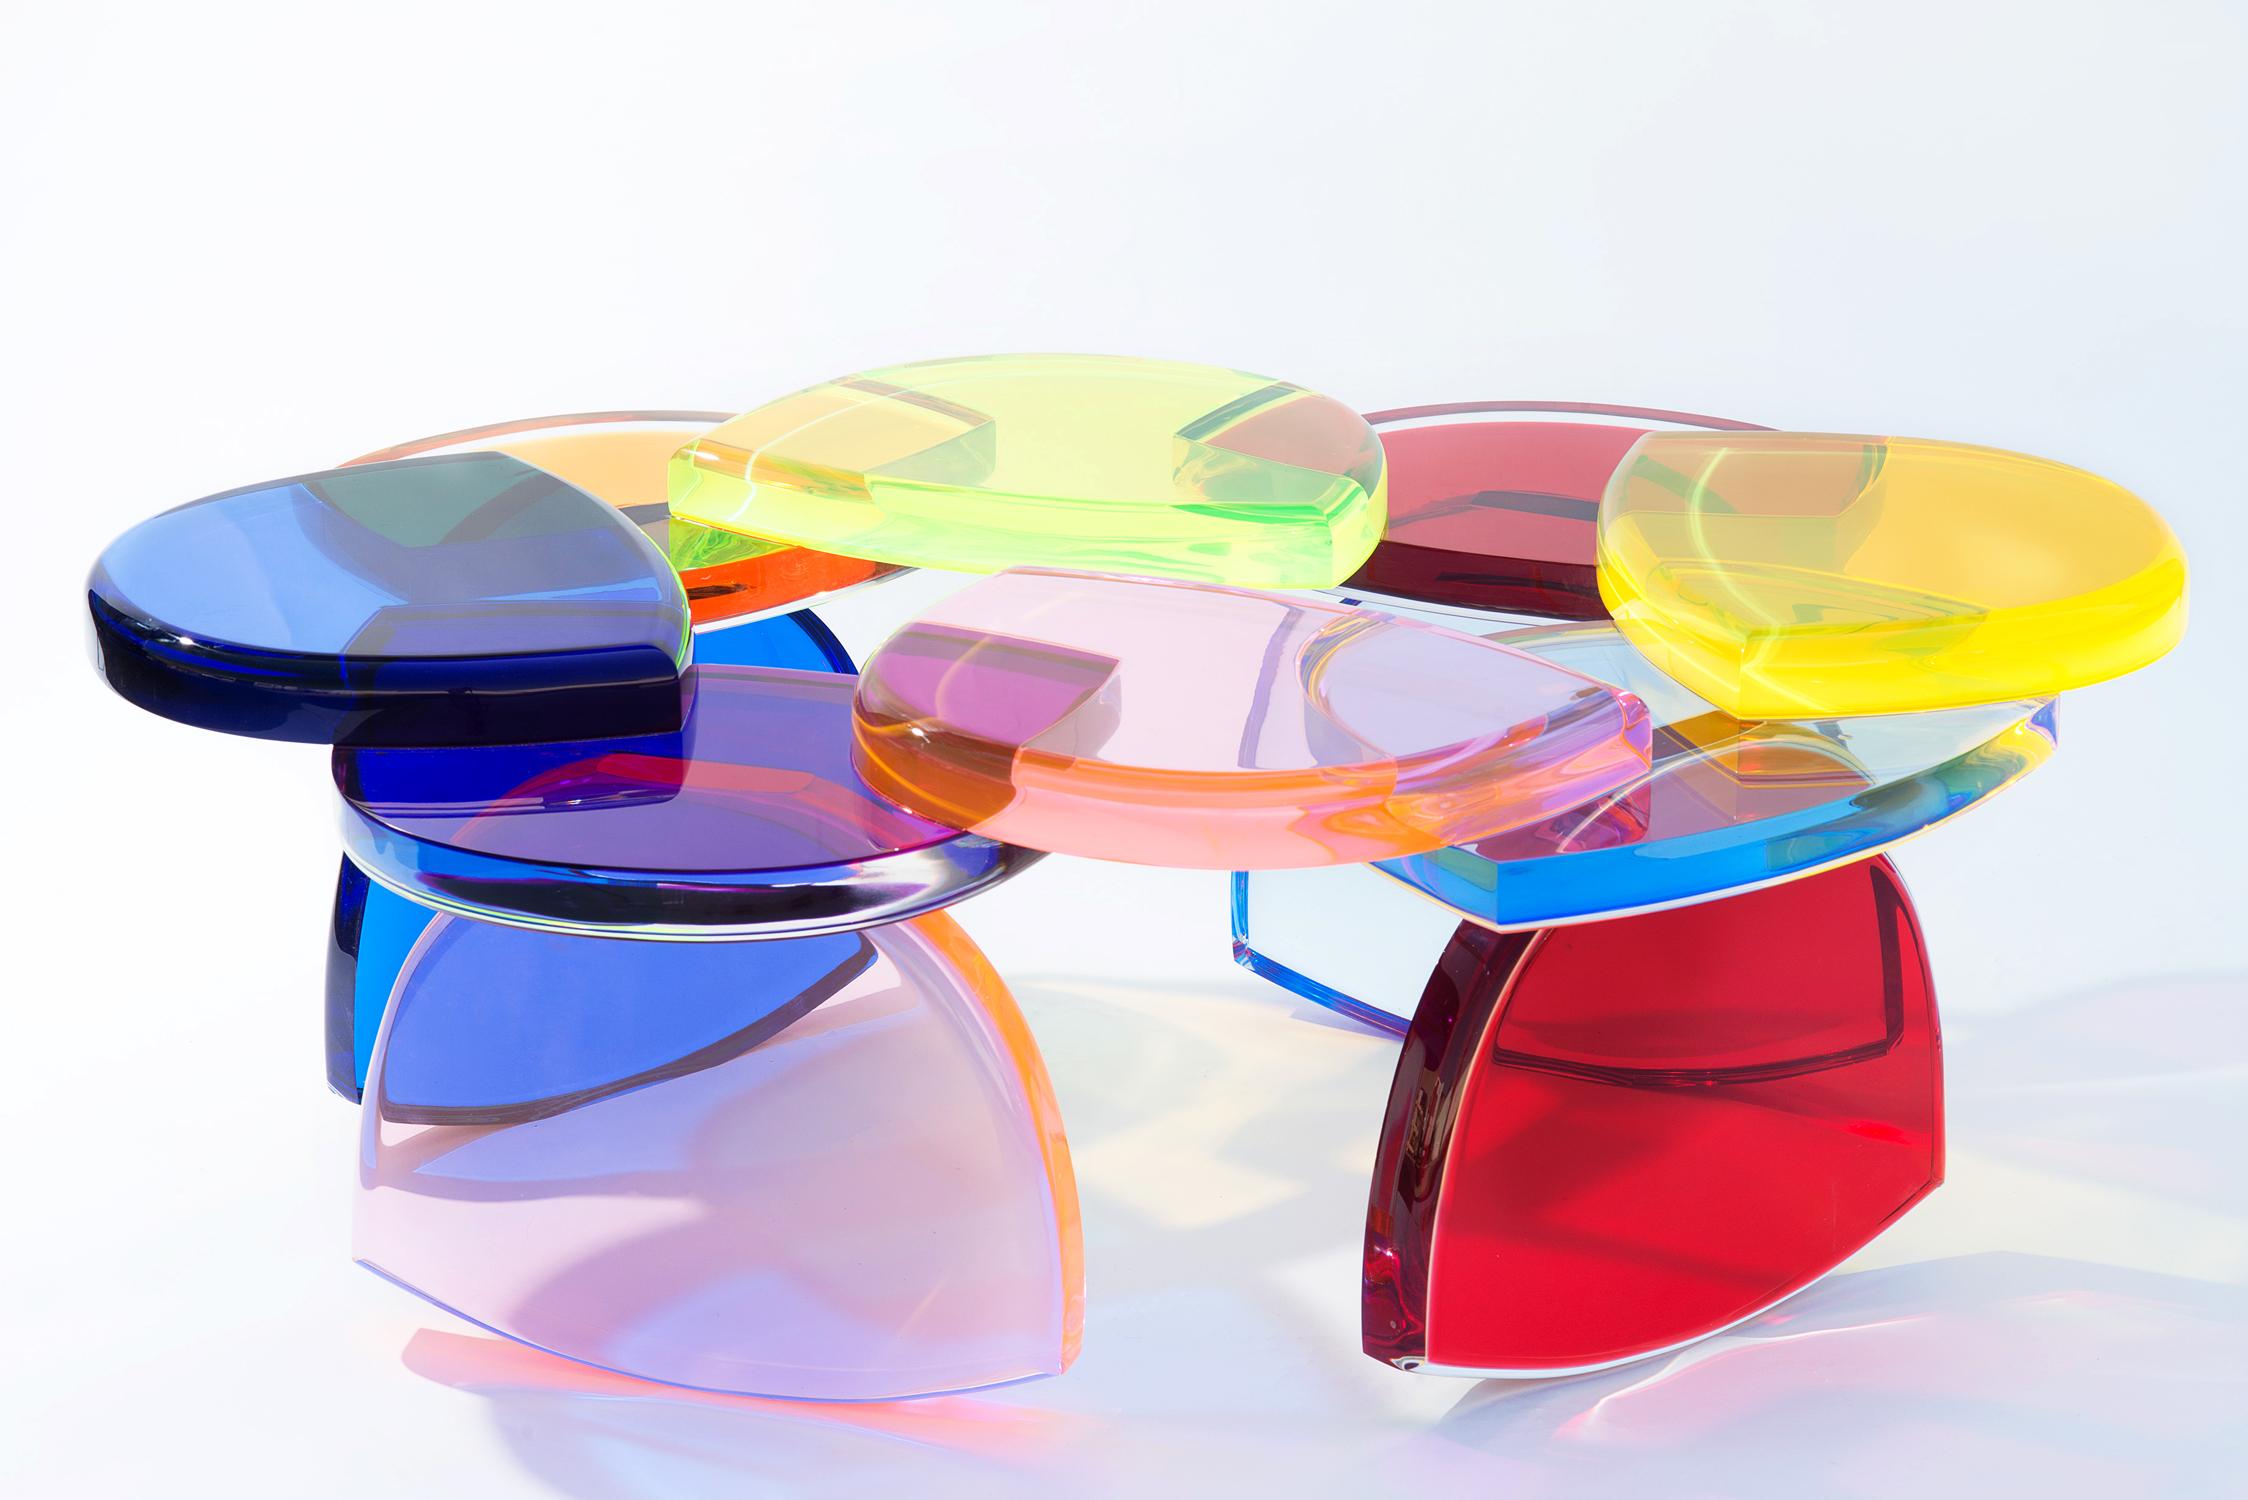 Coffee table Bon Bon model with a structure of colored sequences of plexiglass modules that are repeated by building the shape. A series of unique pieces designed by Studio Superego in collaboration with Marco Pettinari for Superego Editions.
Each